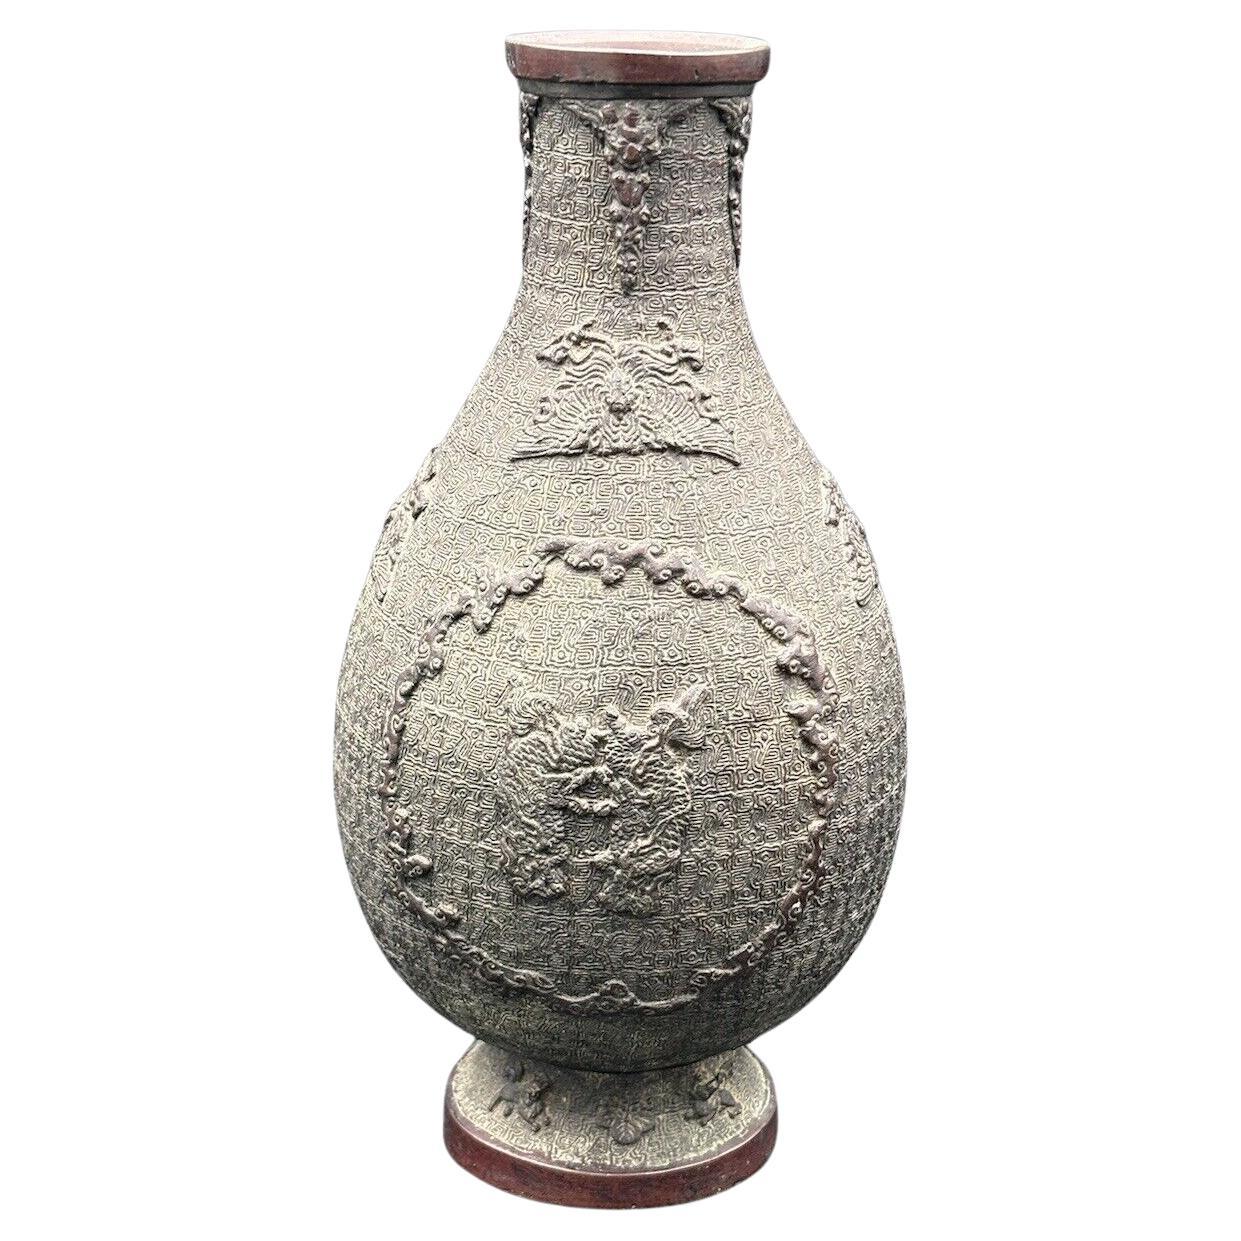 Large Bronze Ming Dynasty Ming Dynasty Vase Geometrically Decorated Archaic 15th Century